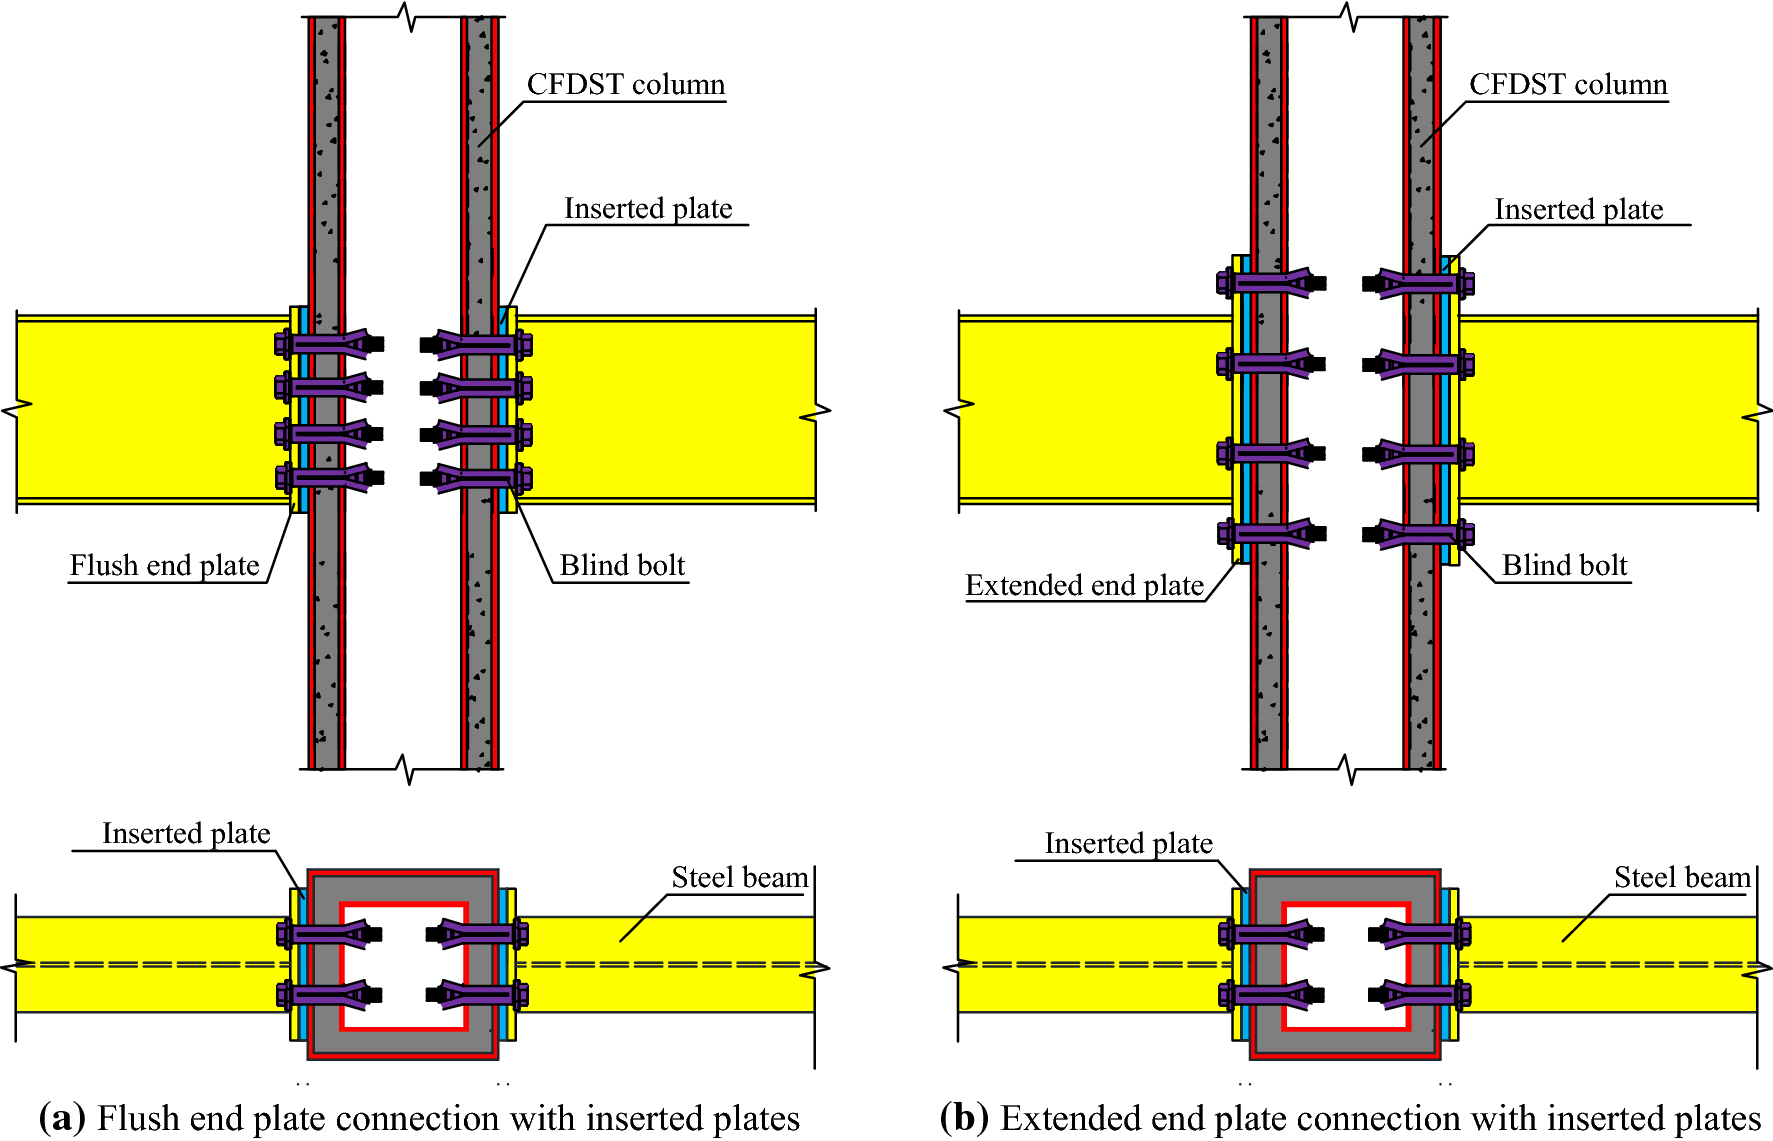 Figure 22 Experimental And Analytical Behavior Of Square Cfdst Column Blind Bolted To Steel Beam Connections Springerlink